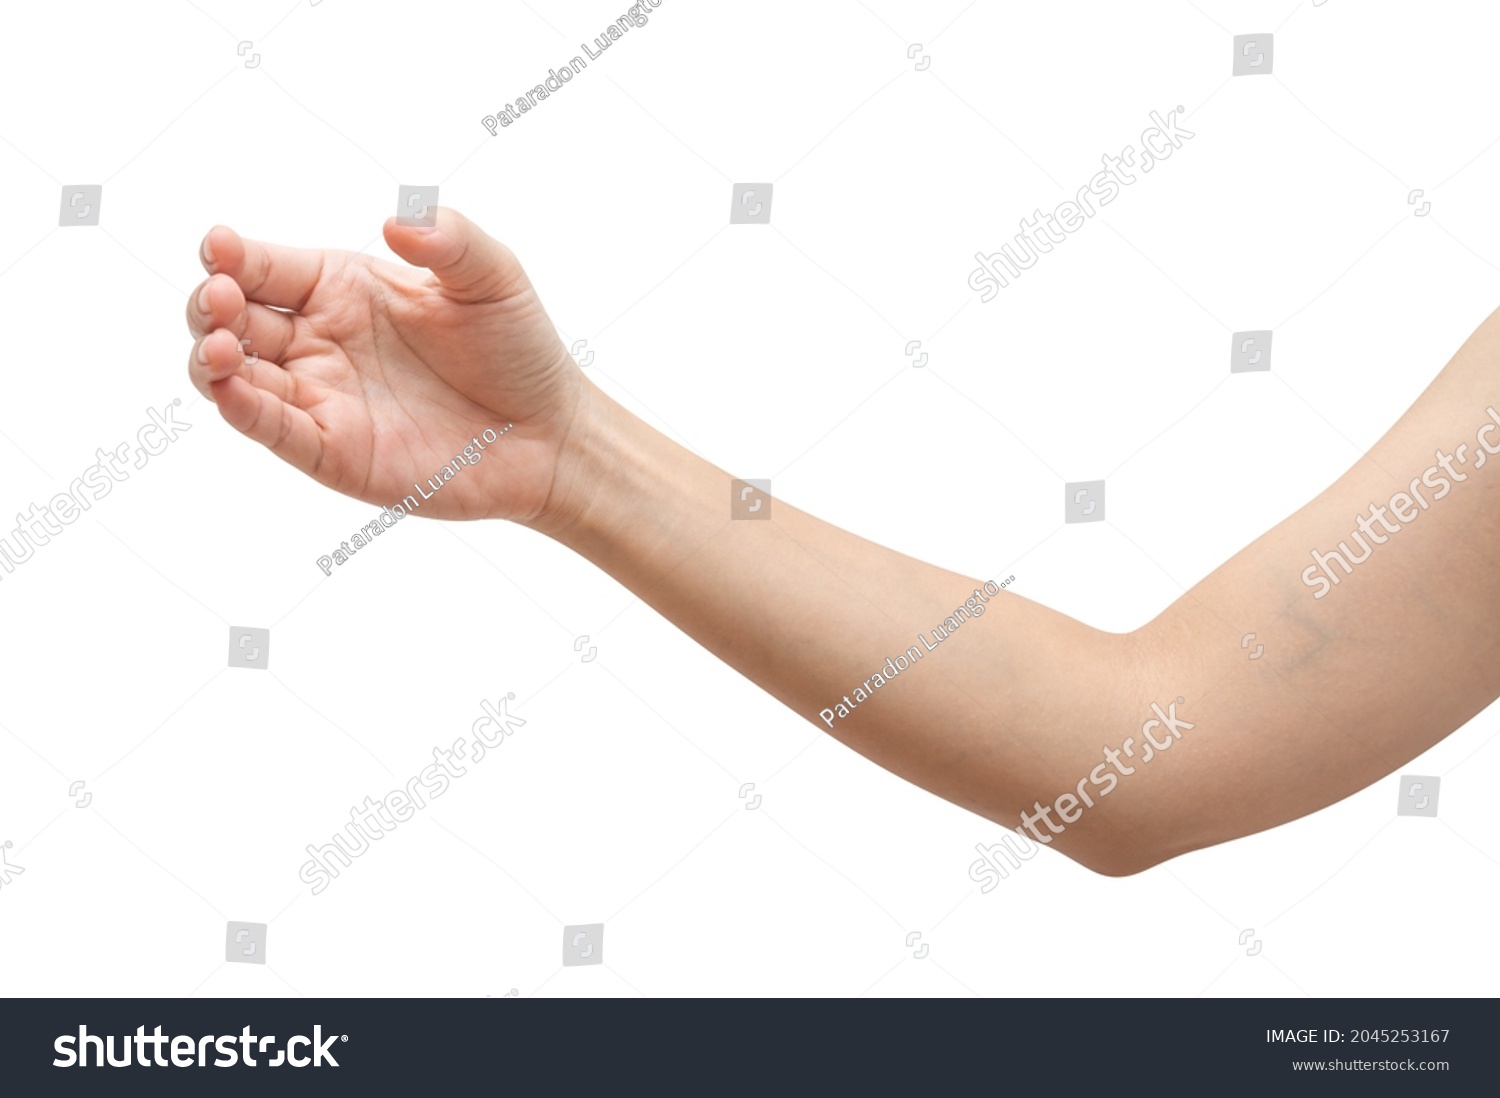 Close up woman hand holding something like a bottle or can isolated on white background with clipping path. #2045253167